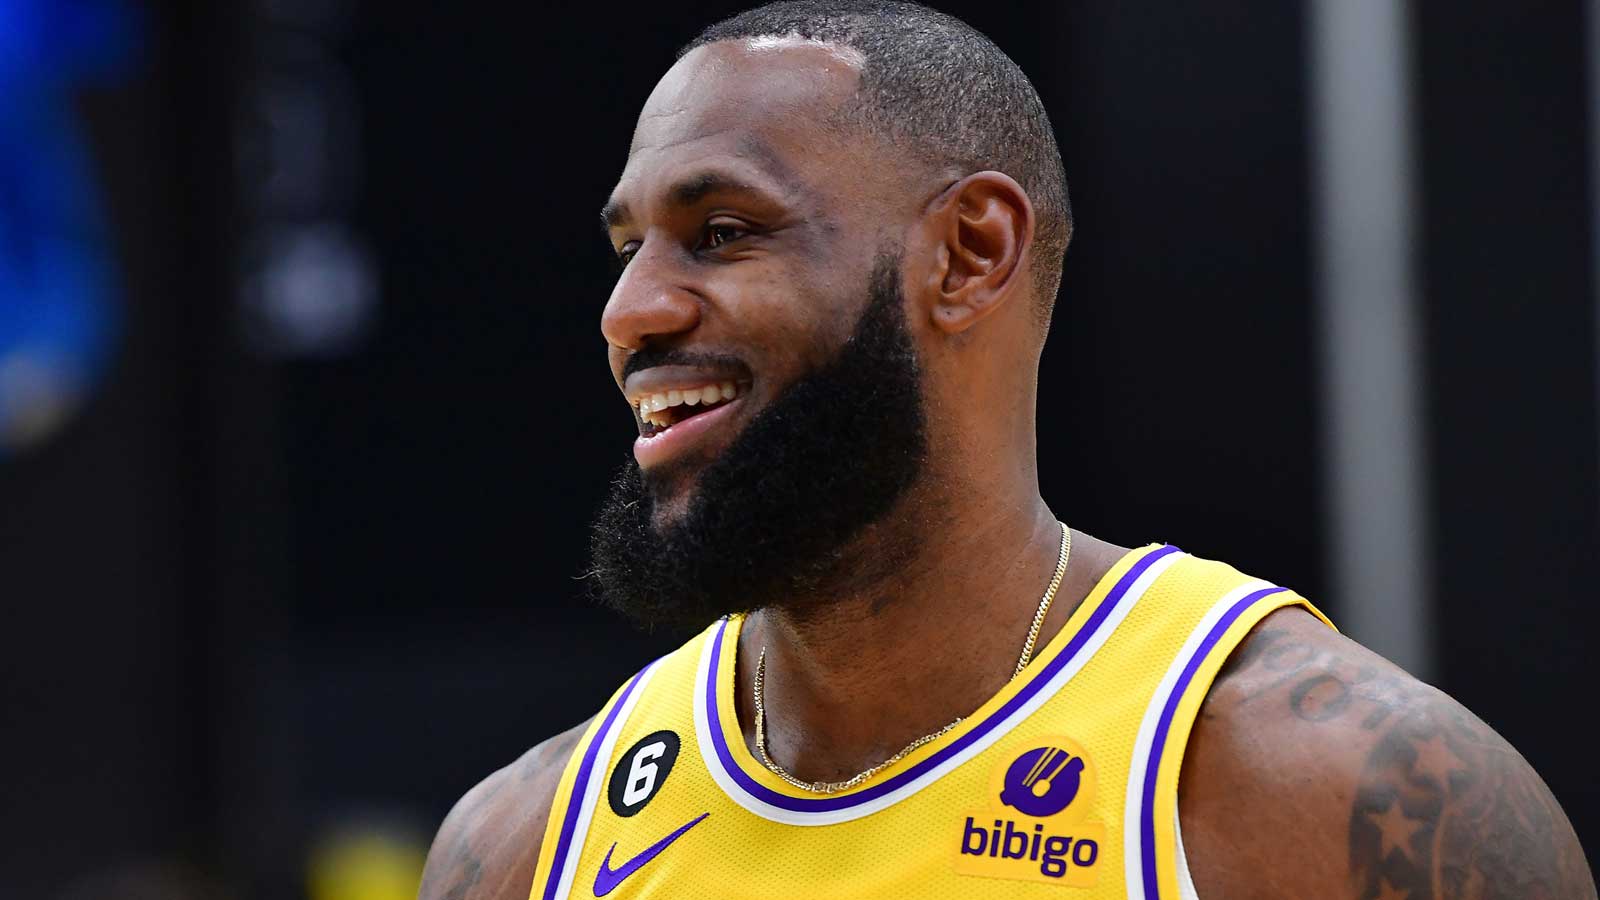 Why is Bibigo on the Lakers' jerseys? Breaking down Los Angeles